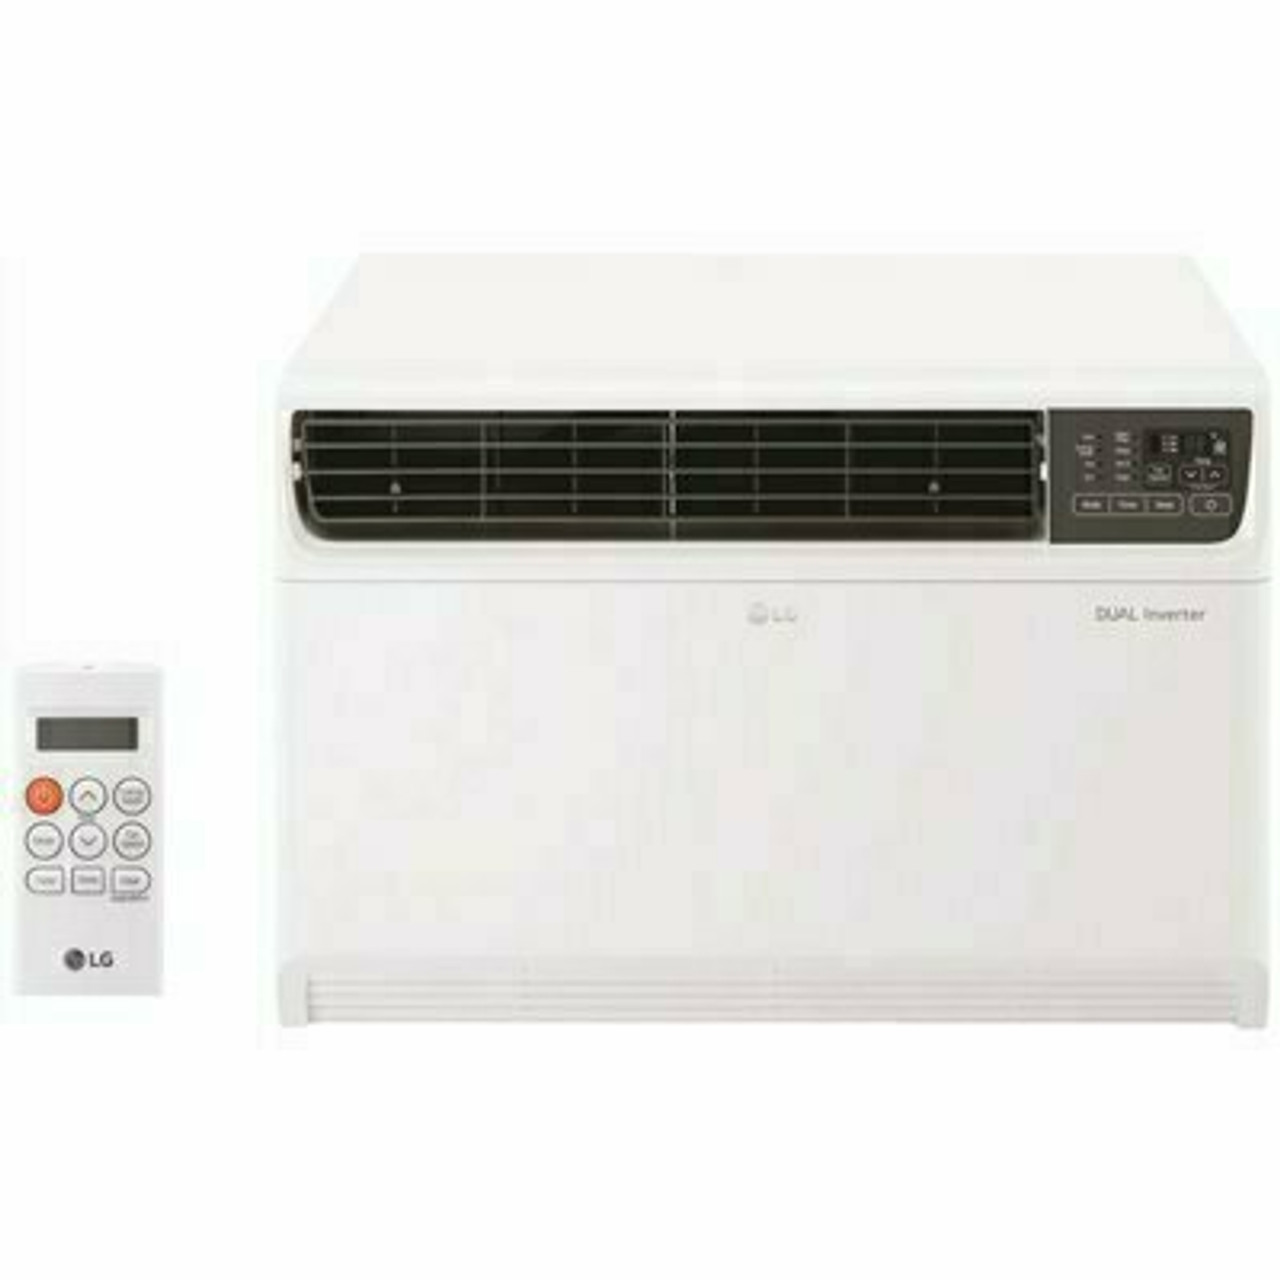 LG Electronics 22,000 Btu 230/208-Volt Dual Inverter Smart Window Air Conditioner Lw2217Ivsm With Wifi And Remote In White